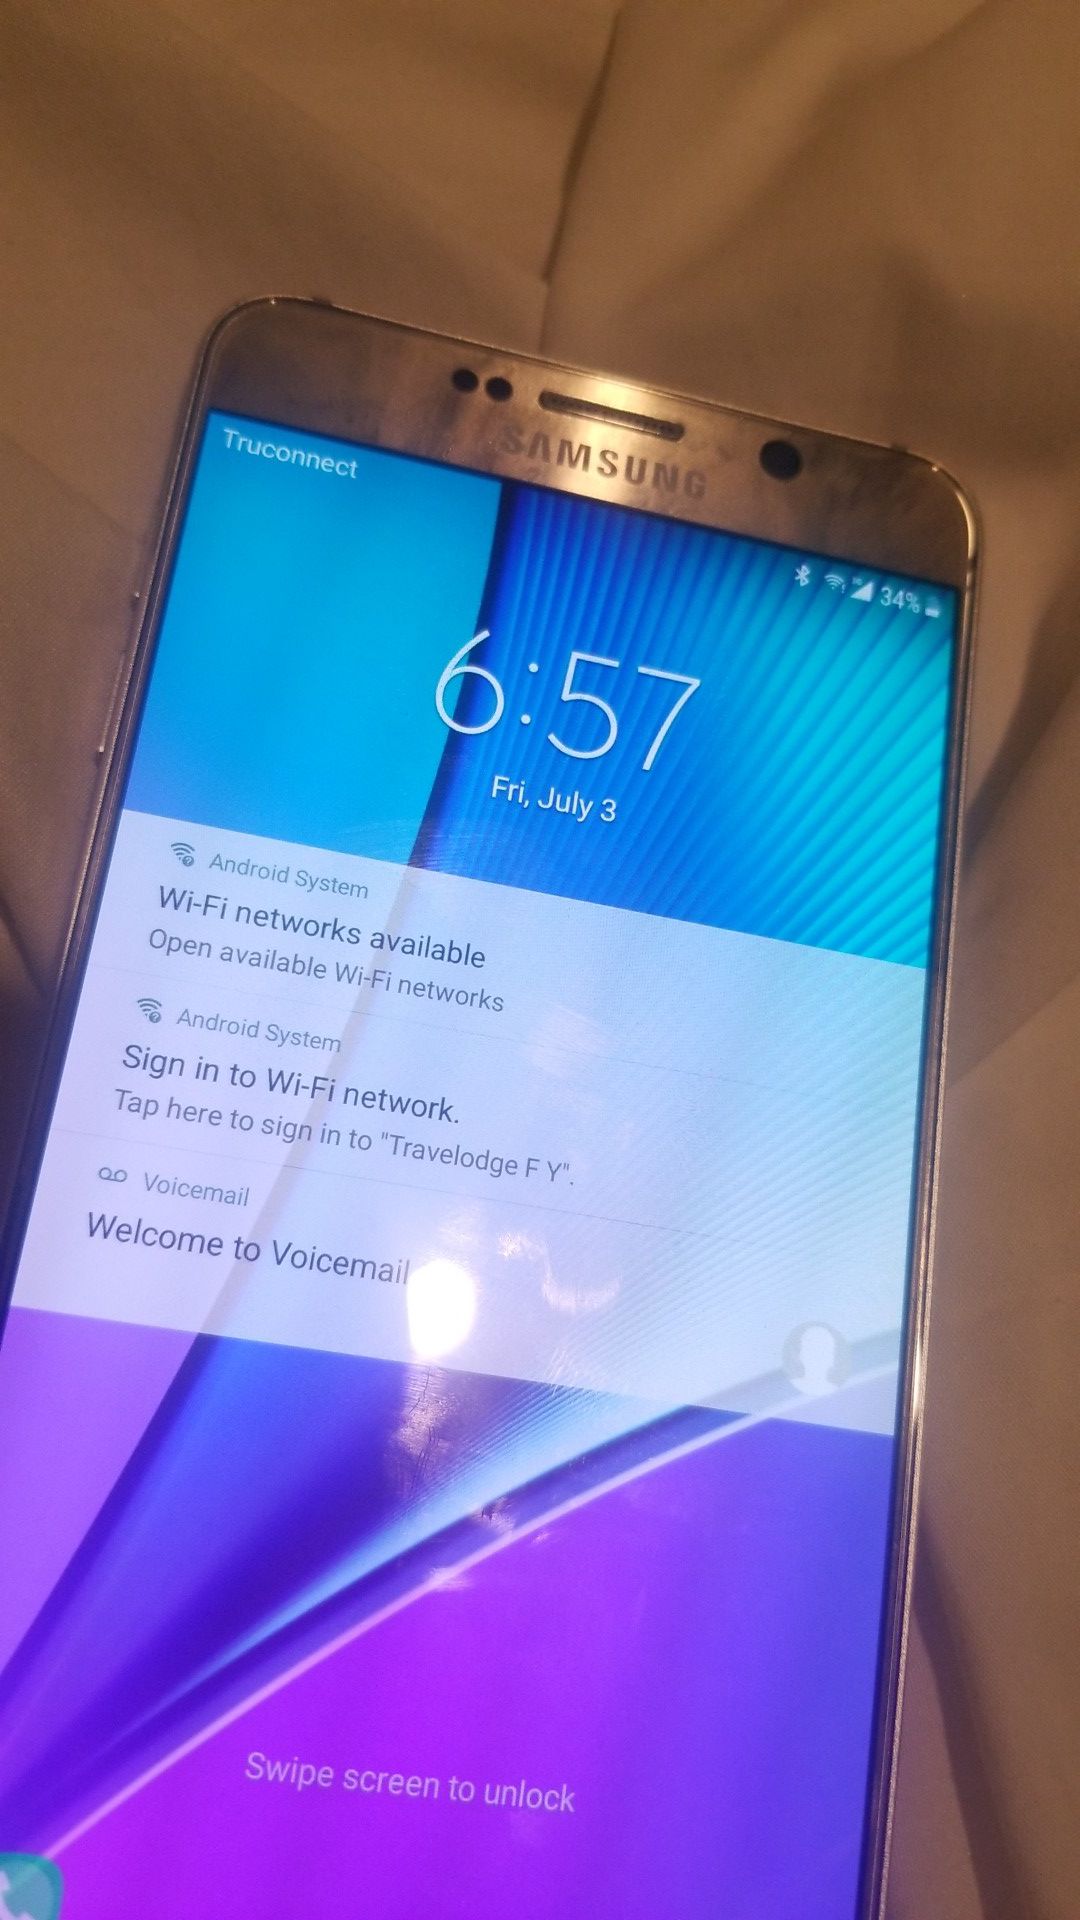 Galaxy note 5 unlocked to any carrier